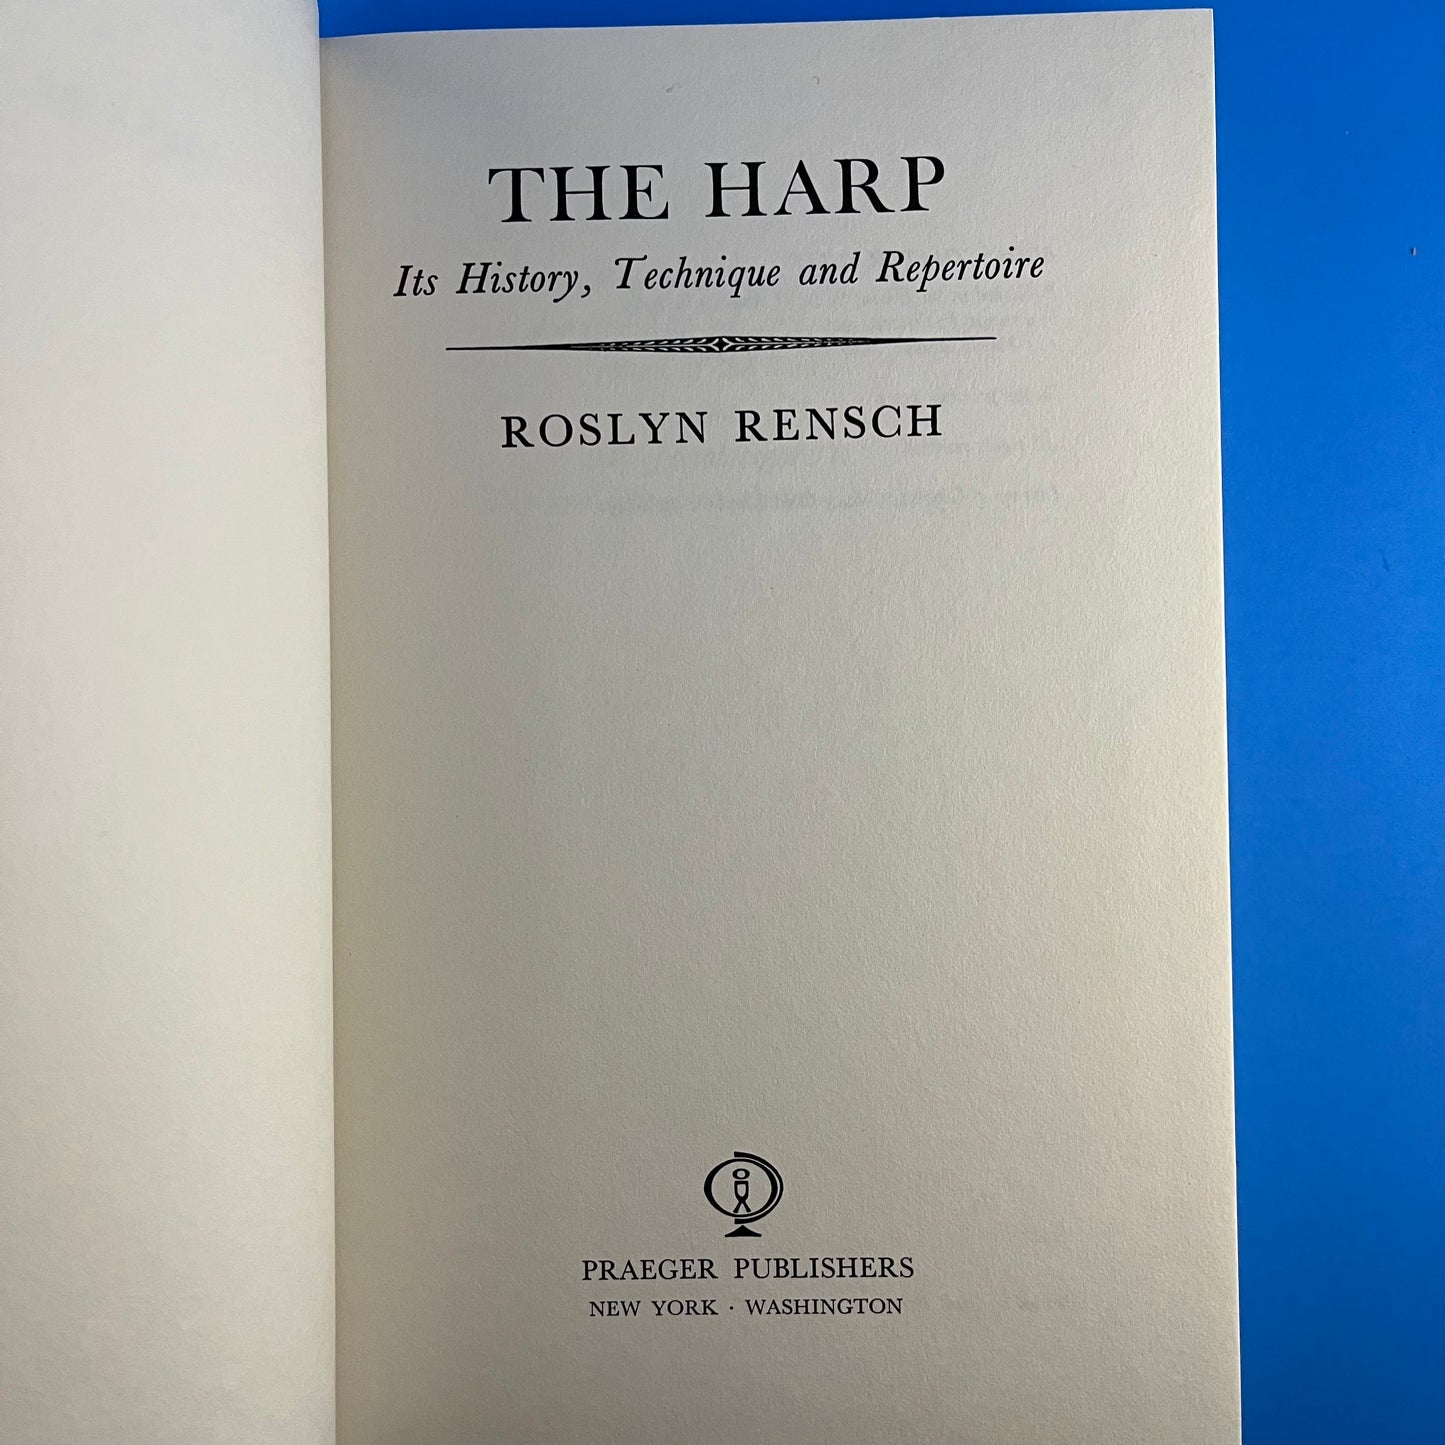 The Harp: Its History, Technique and Repertoire